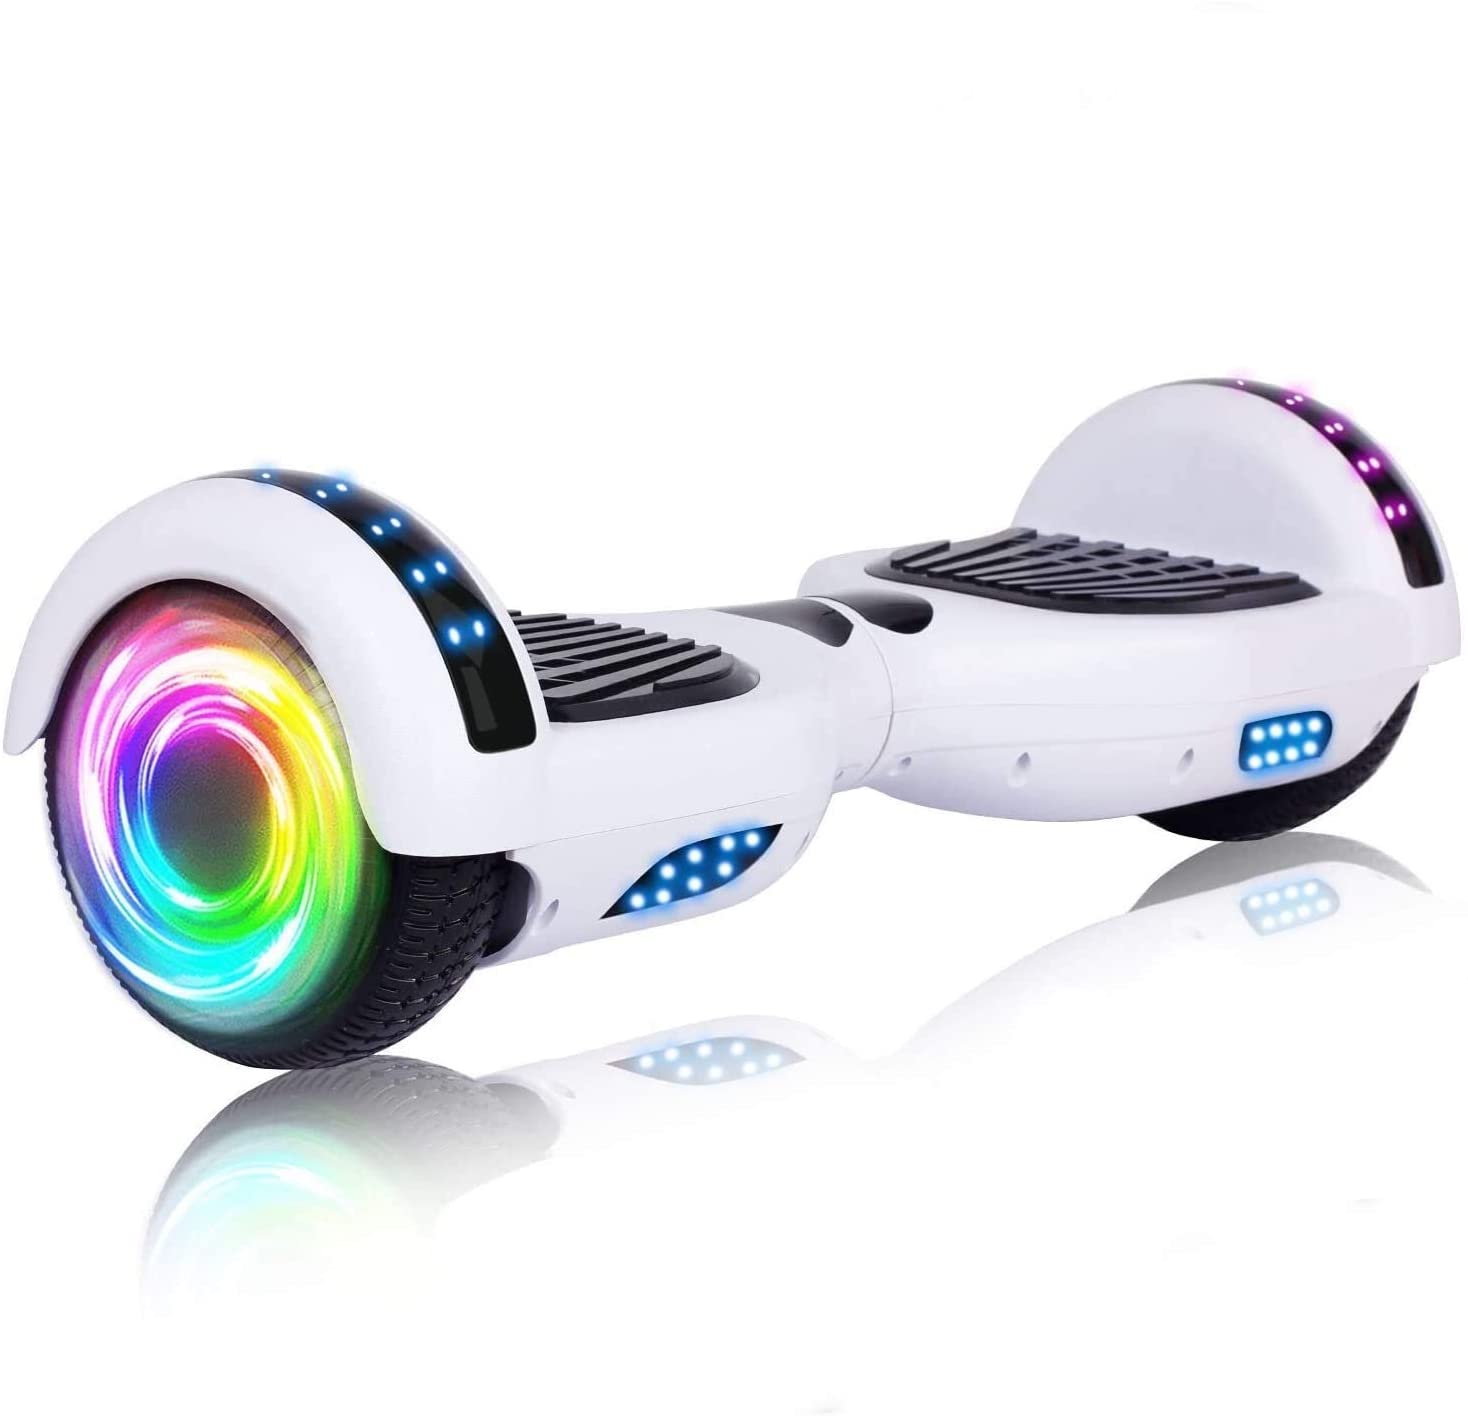 SISIGAD 600W Hoverboard Best Hoverboard for 10 Year Old Kids